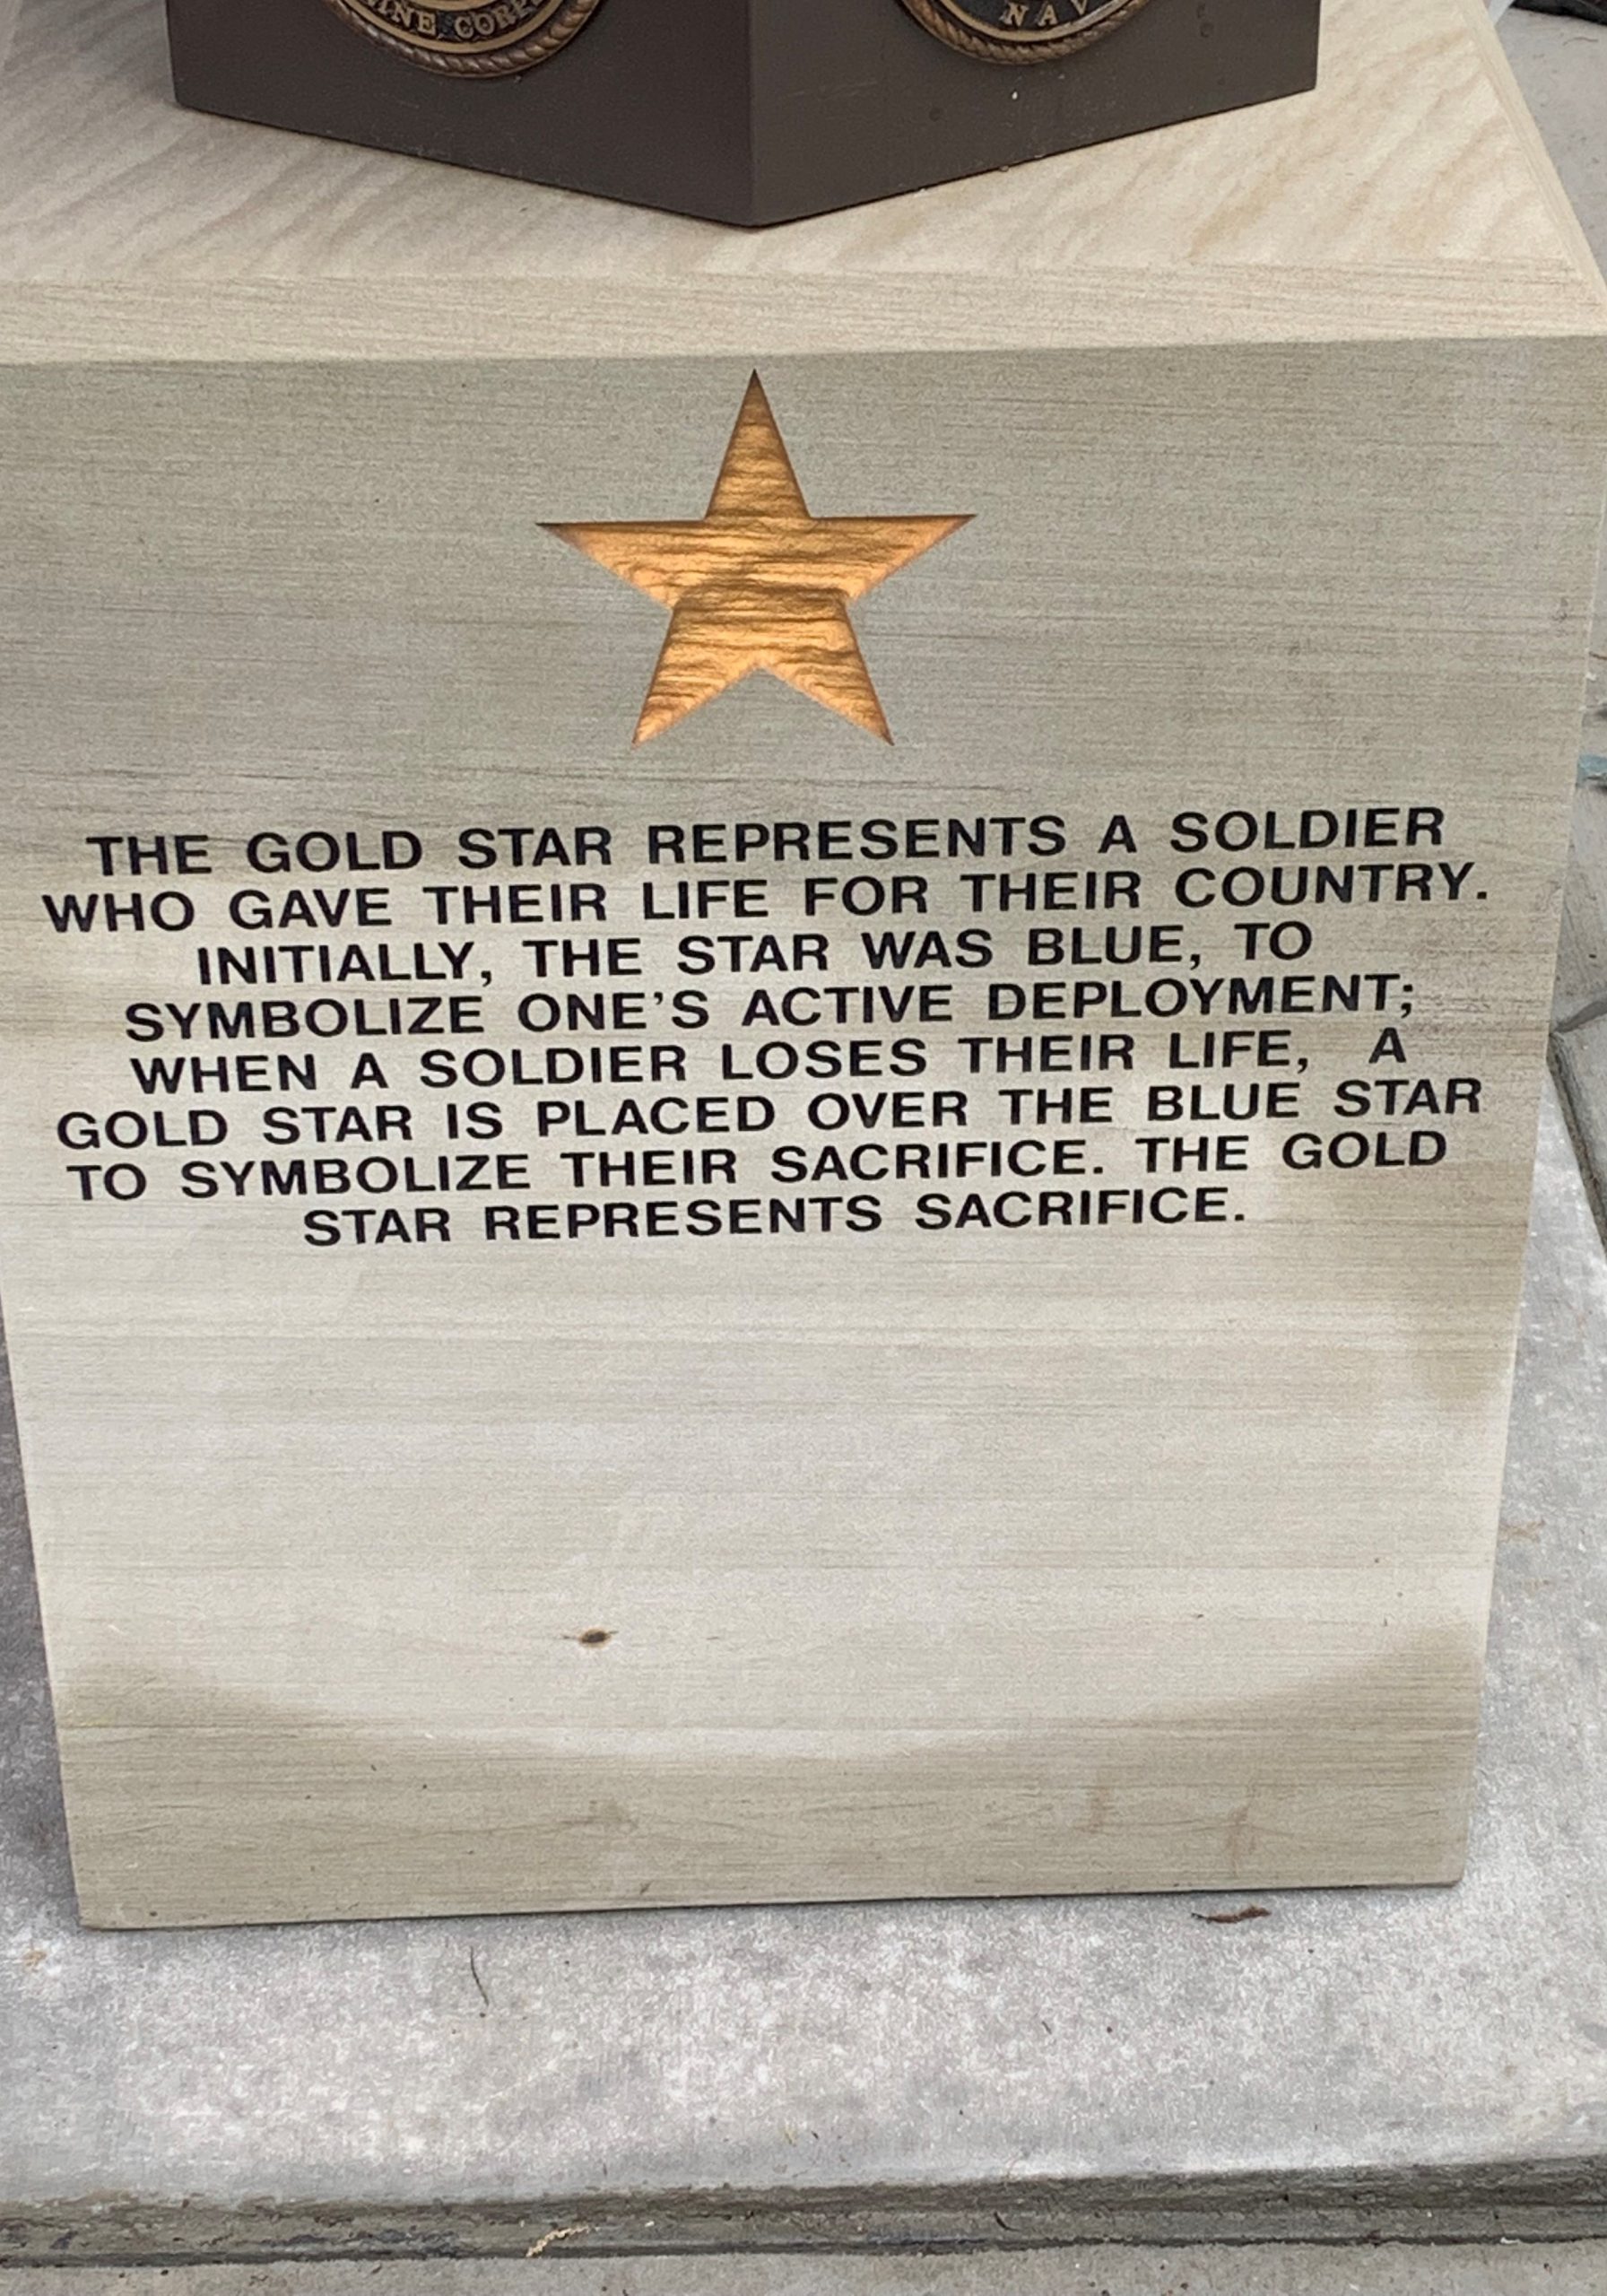 RM Gold Star Image